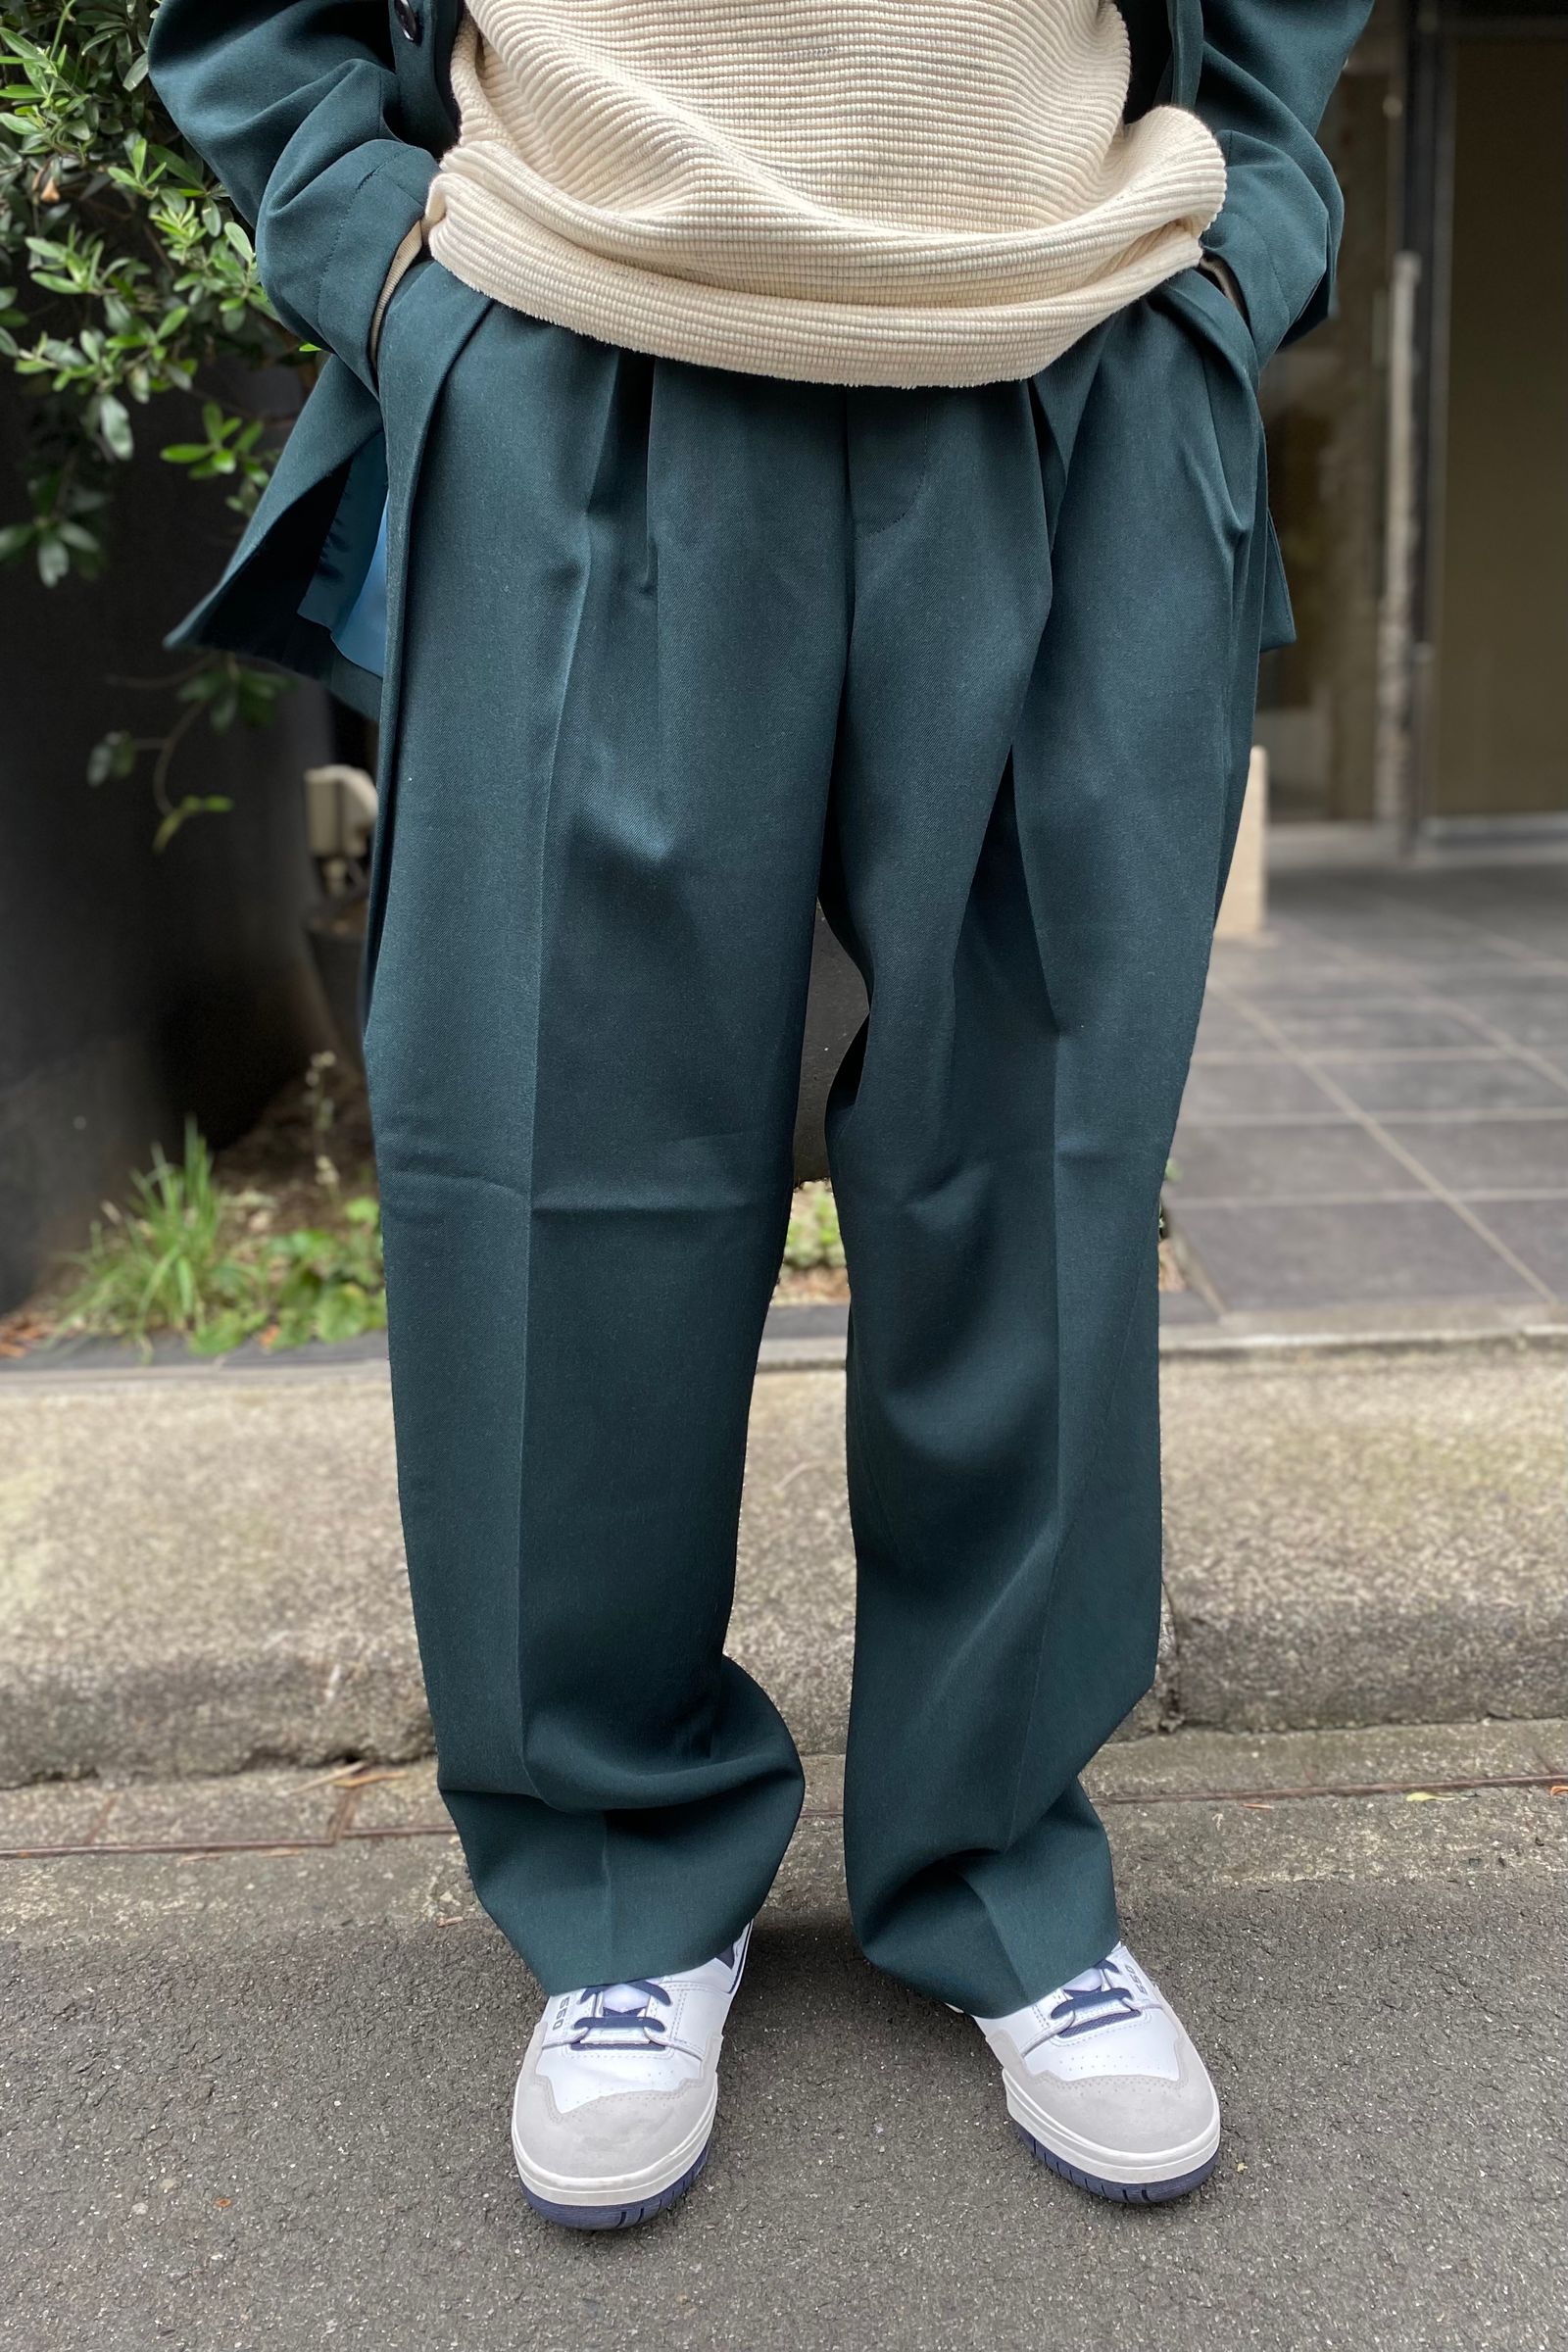 POLYPLOID - wide tapered pants c 21aw 9月25日発売! | asterisk